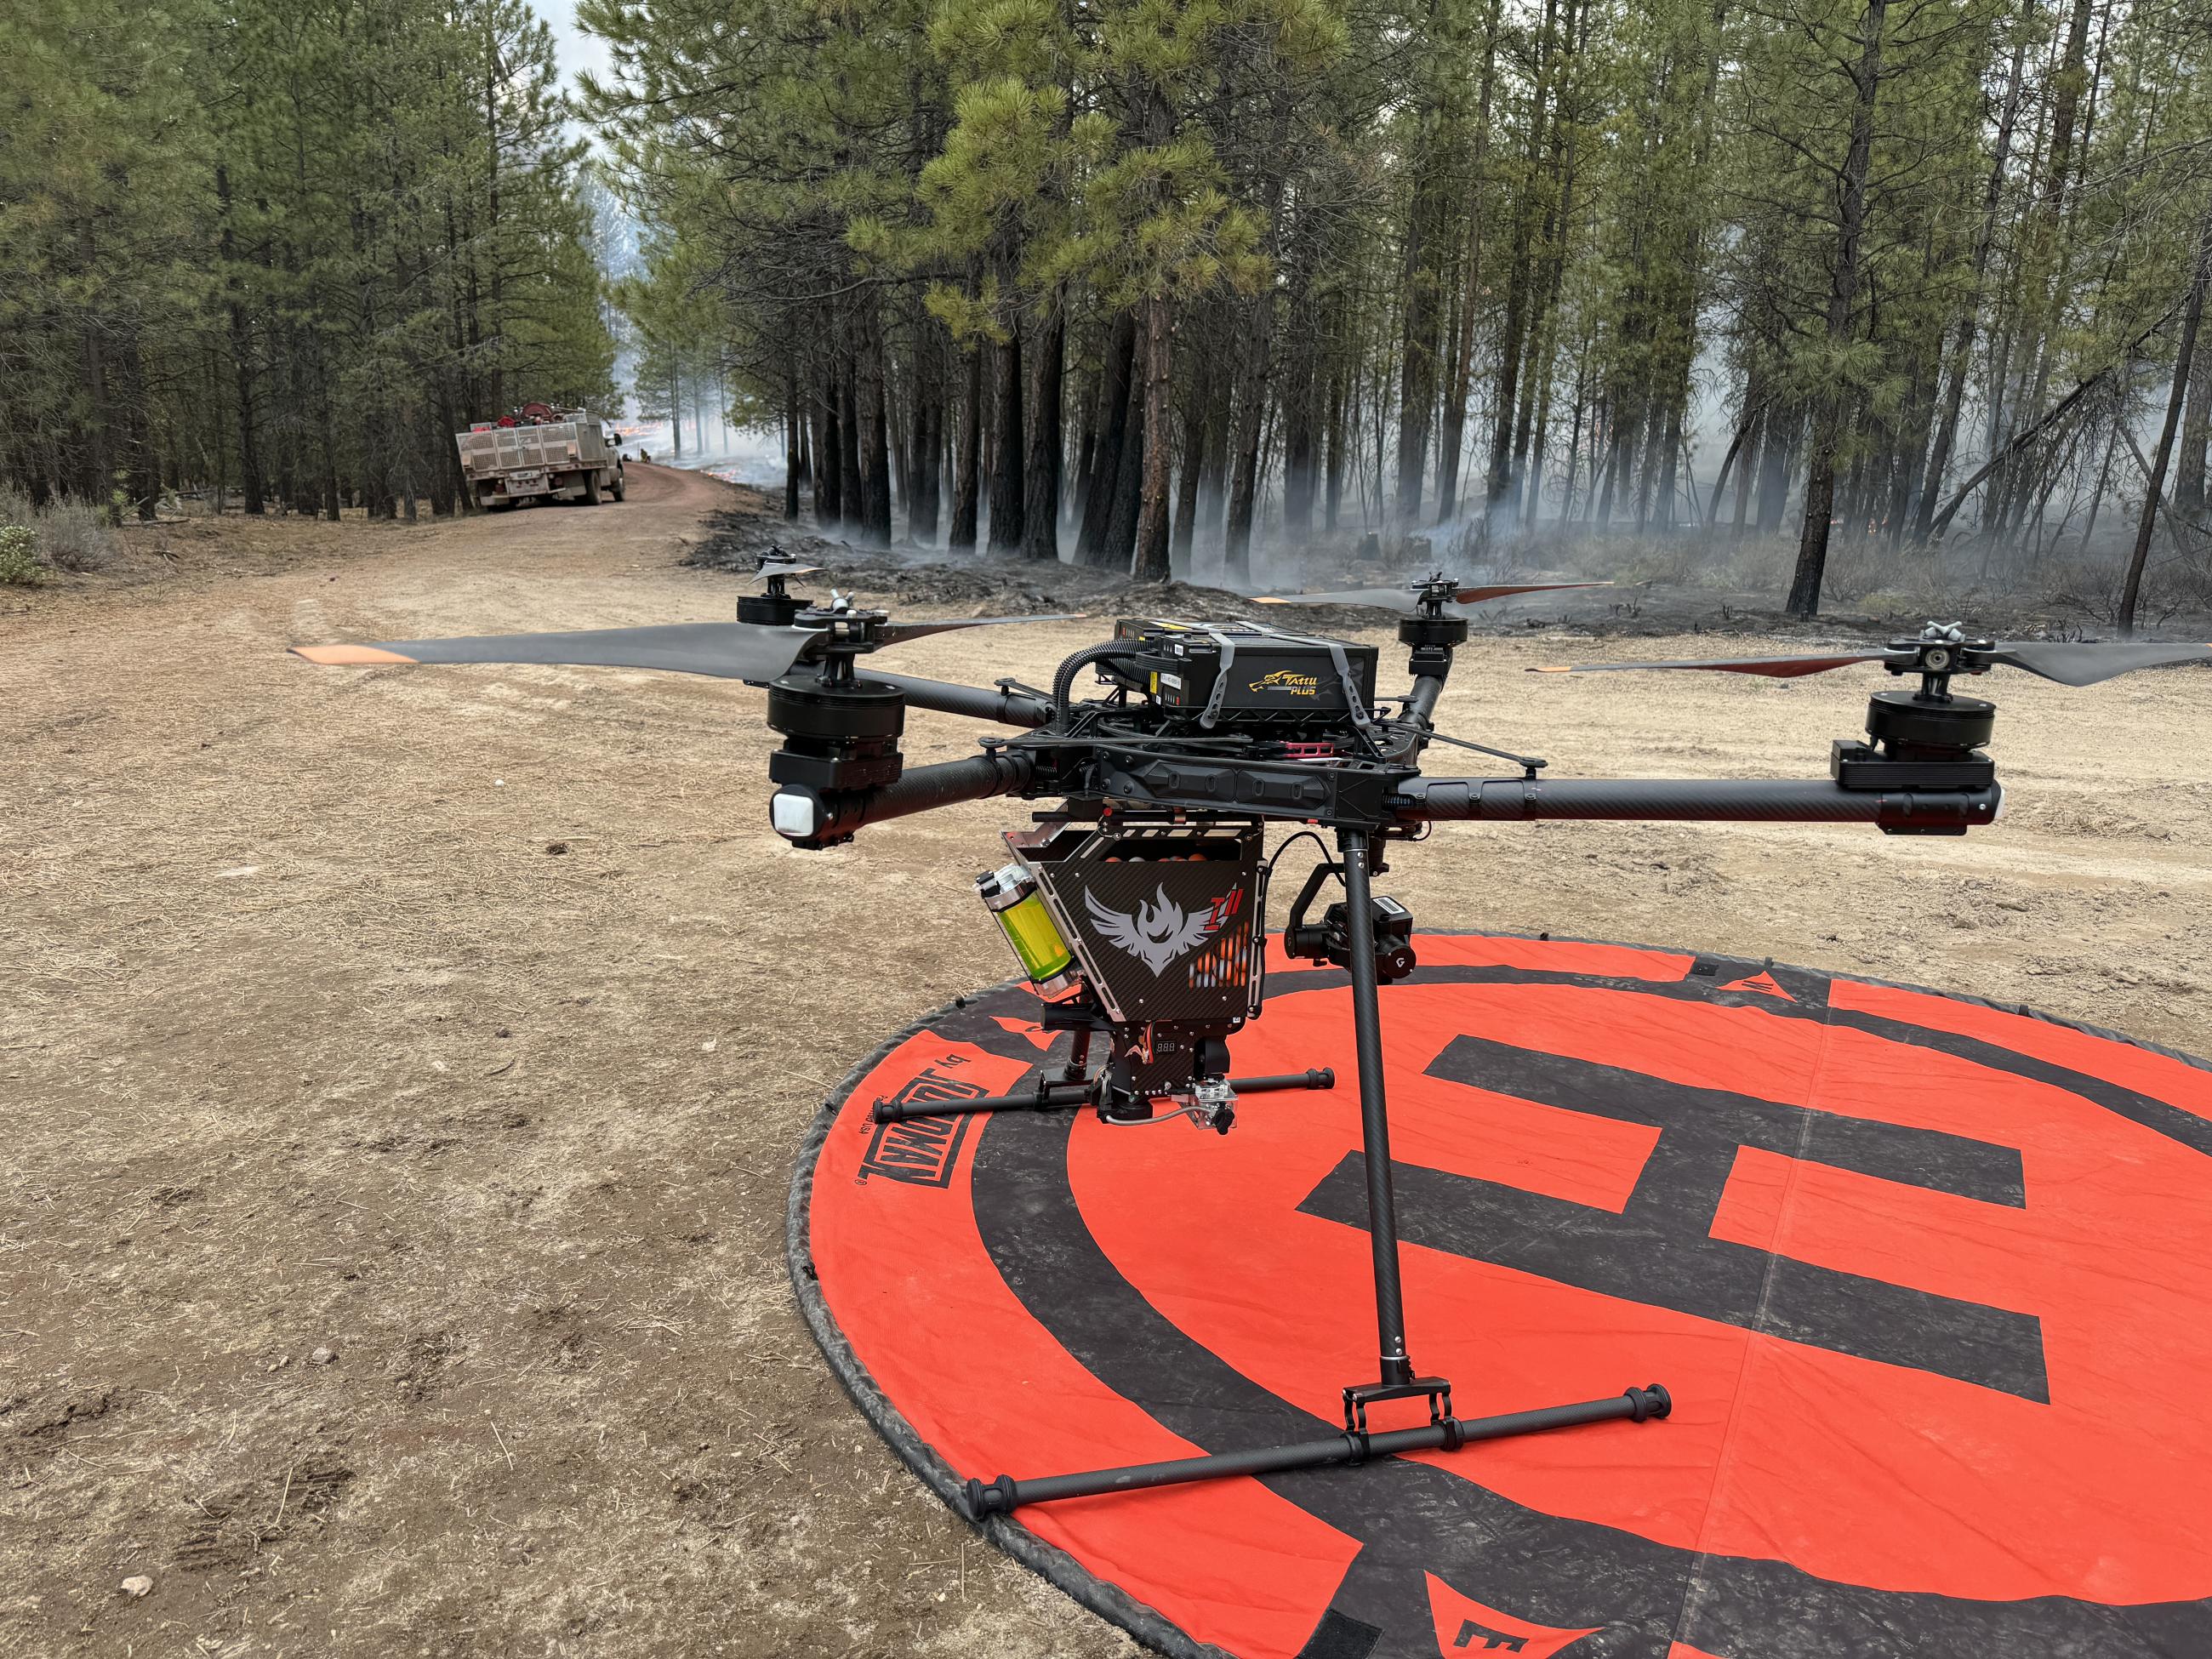 A drone sits on a Heli-pad in the forest